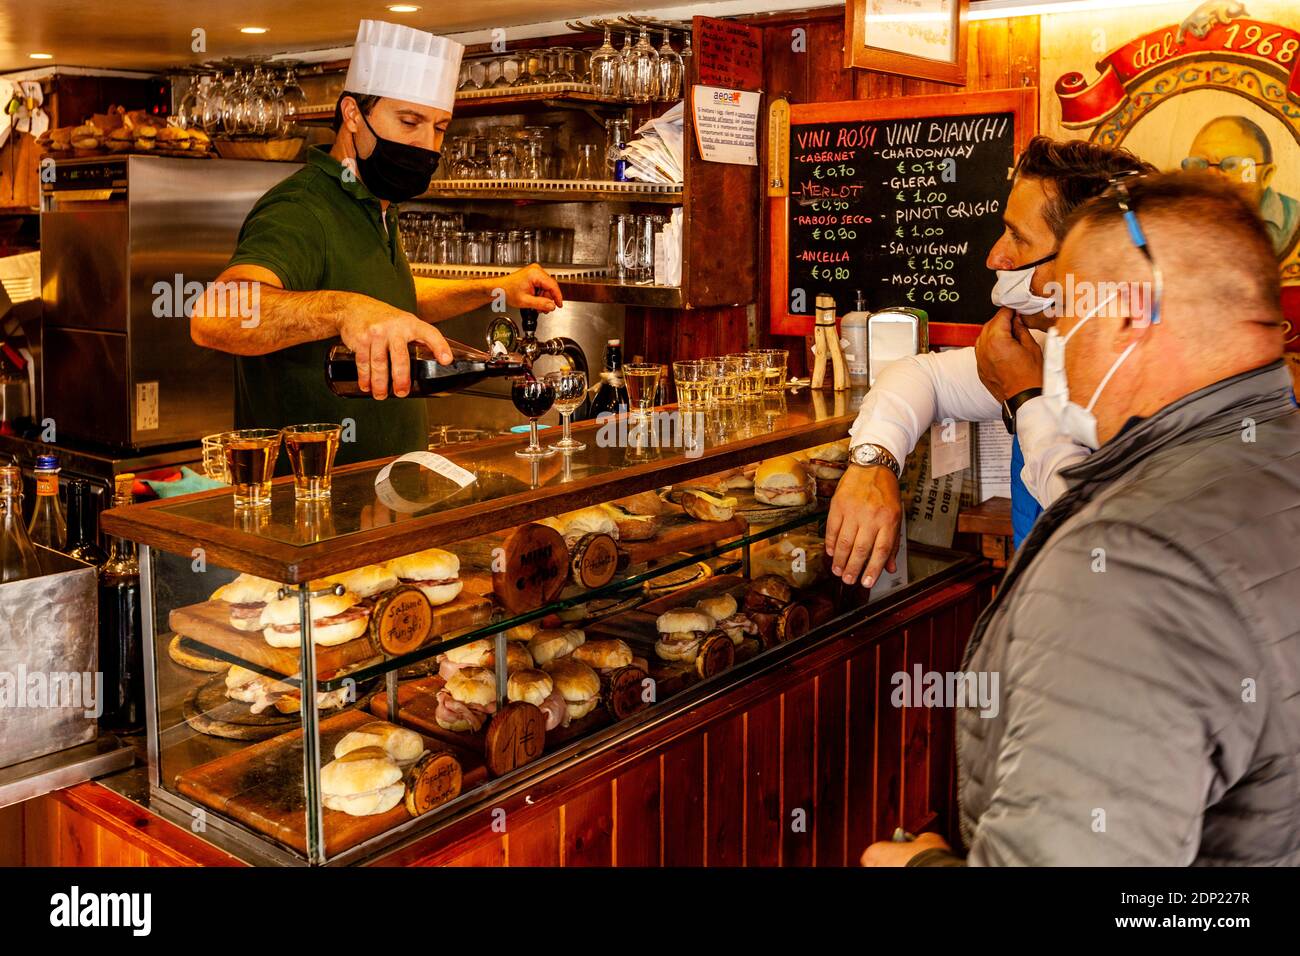 Local People Buying Sandwiches and Wine Inside A Bar, Santa Croce, Venice, Italy. Stock Photo